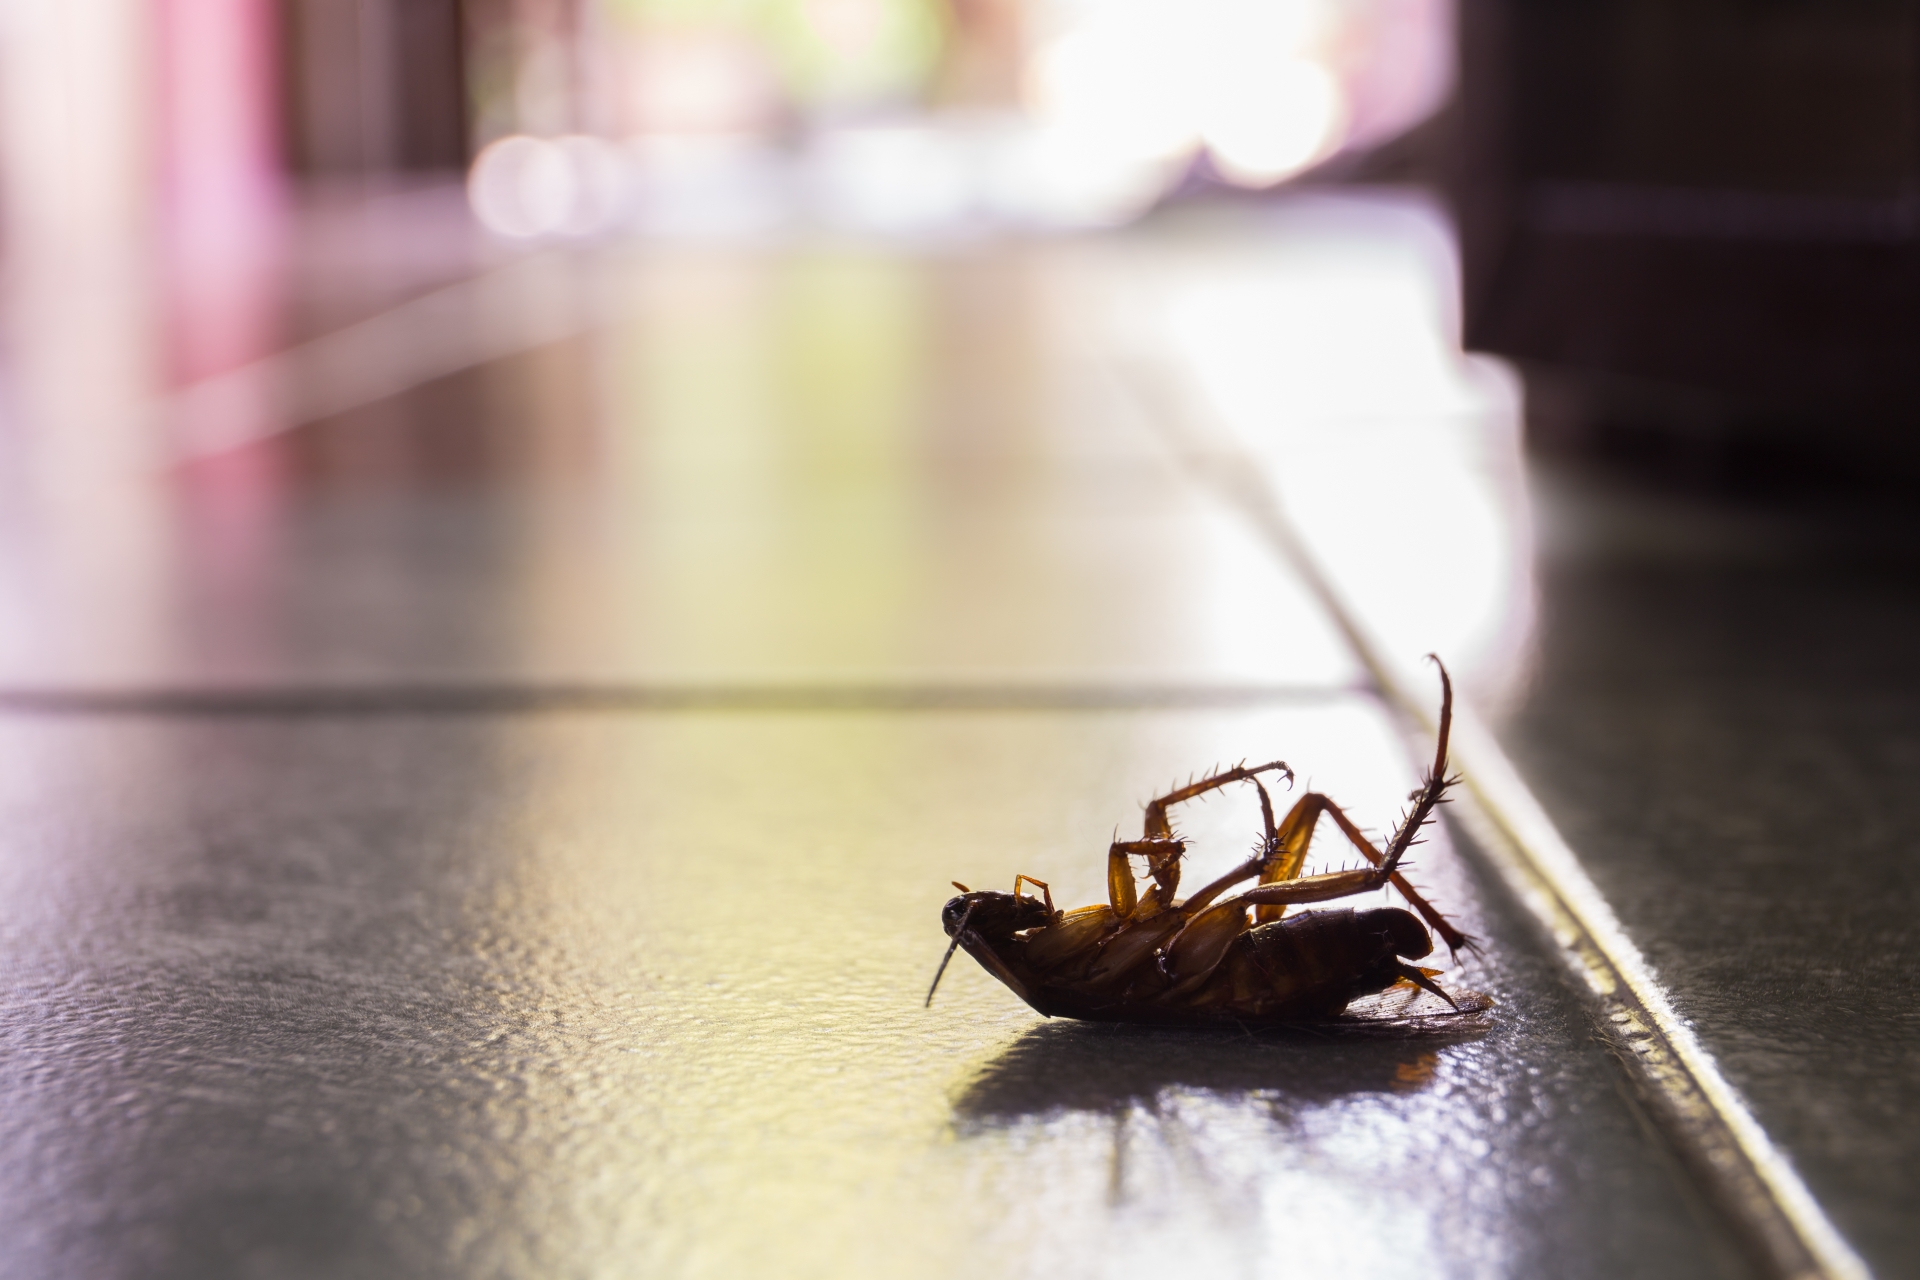 Cockroach Control, Pest Control in Mile End, Stepney, E1. Call Now 020 8166 9746